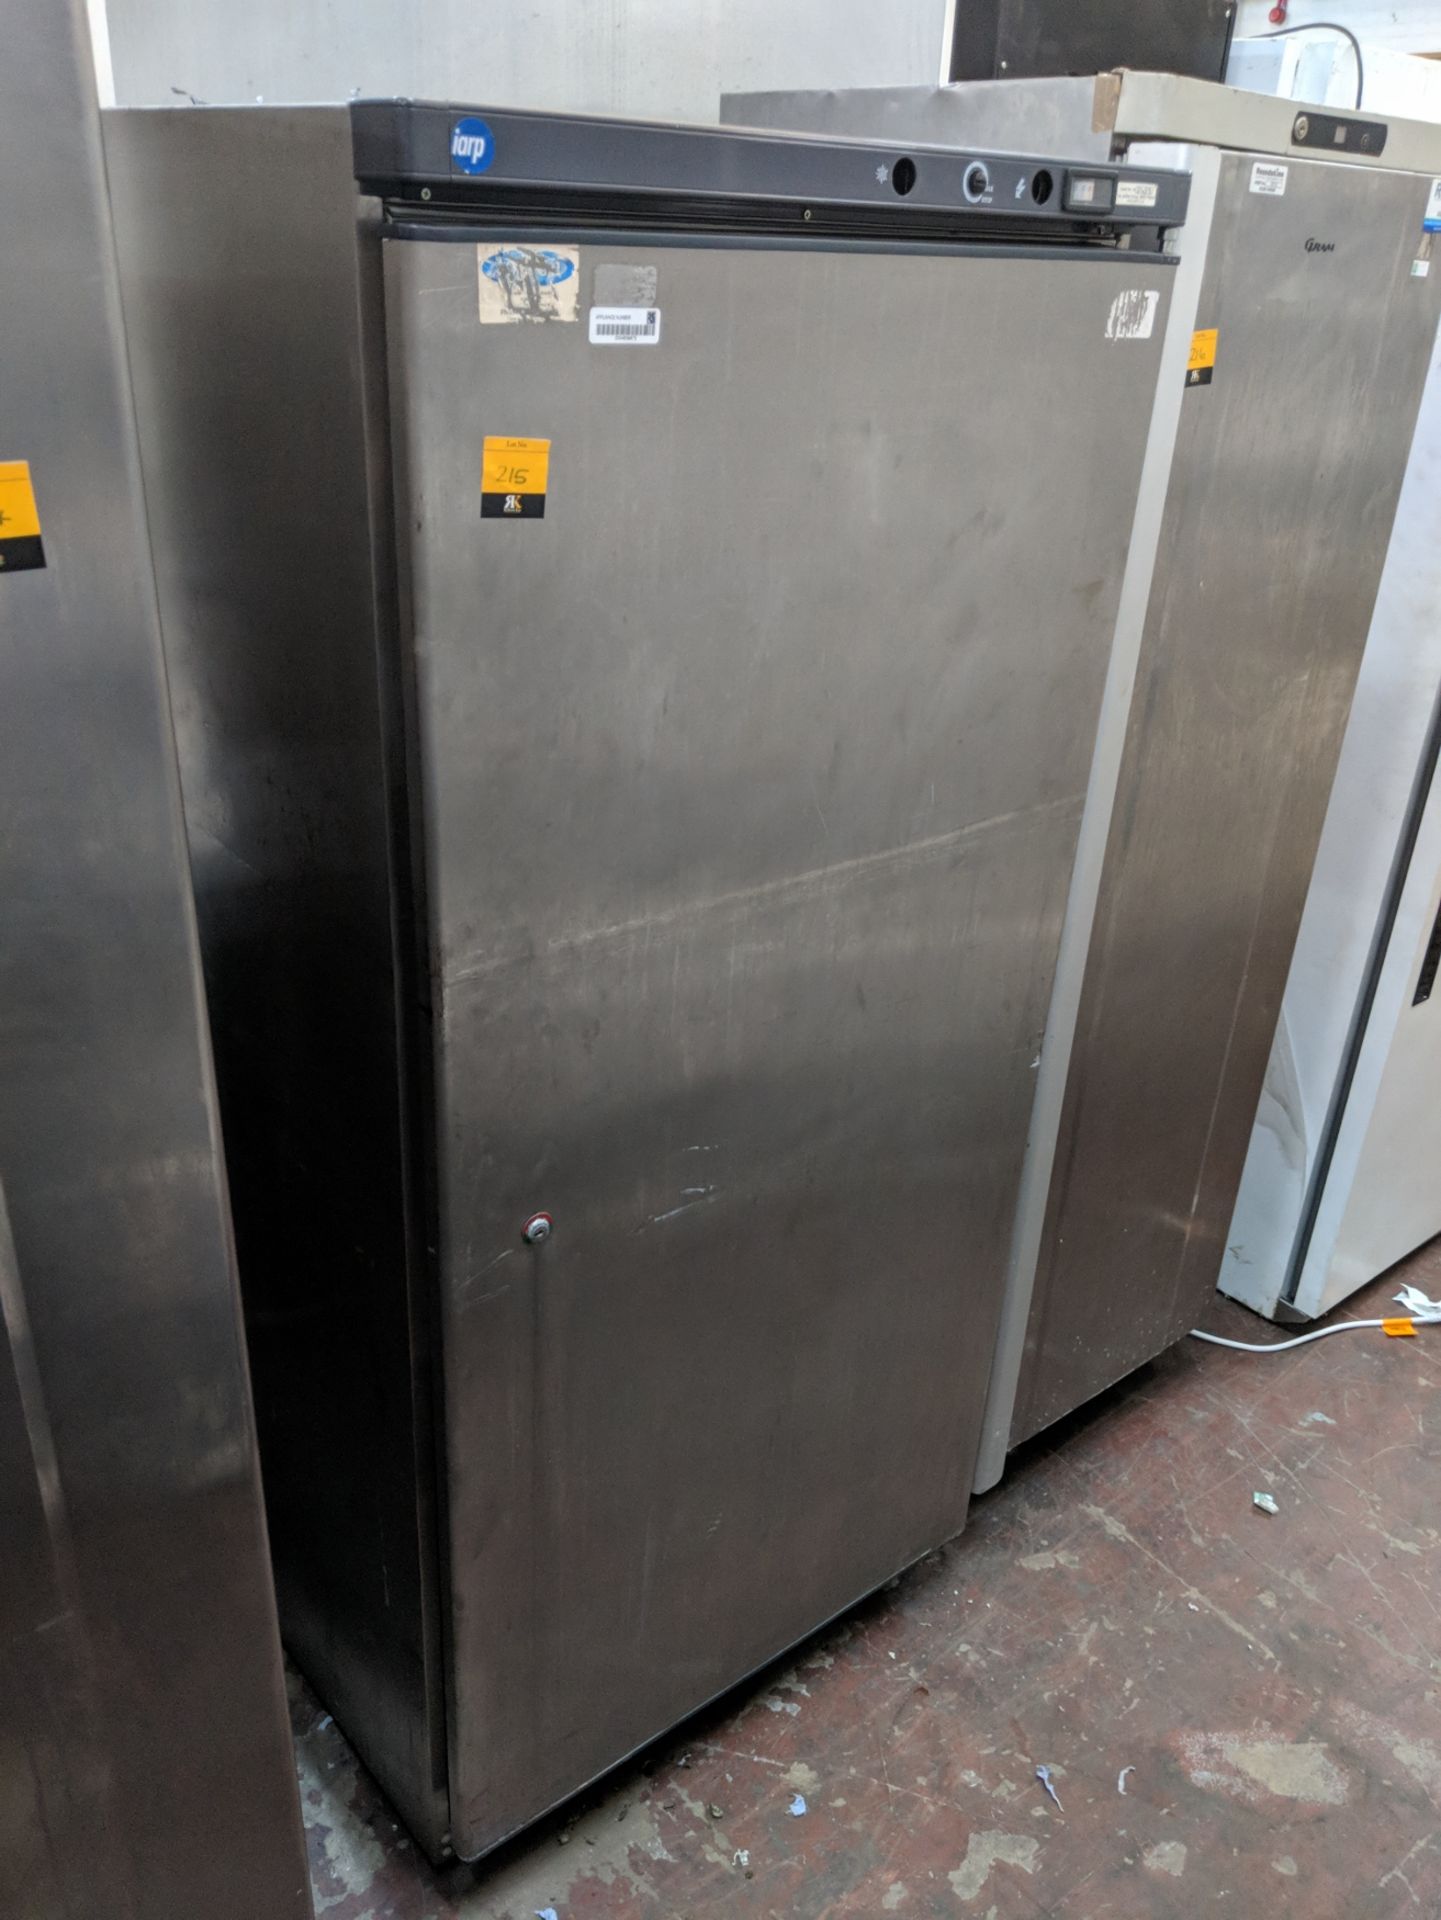 Iarp large wide silver freezer model ABX500N IMPORTANT: Please remember goods successfully bid